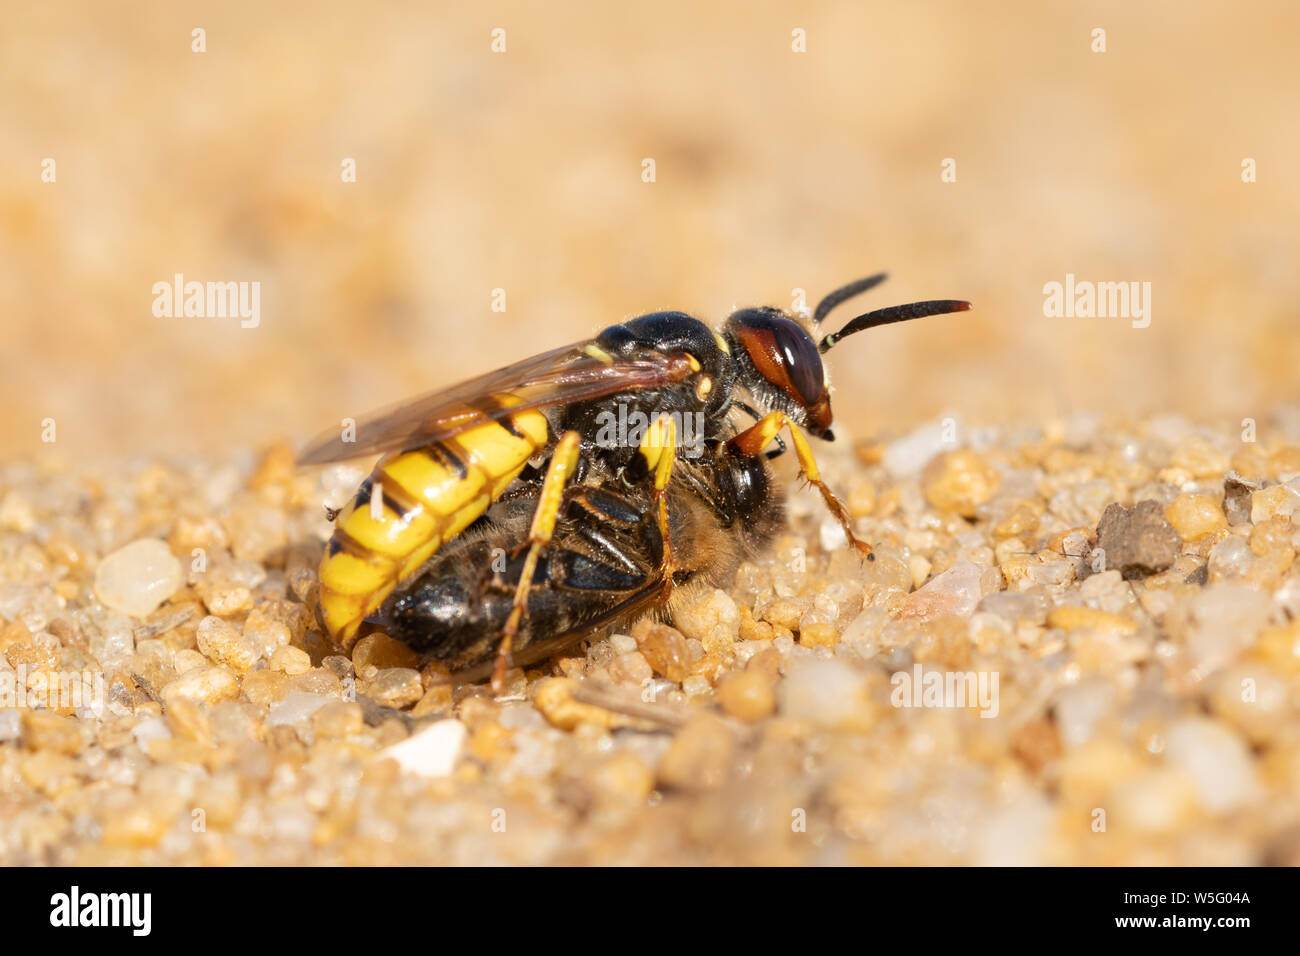 European beewolf (Philanthus triangulum), a solitary wasp species,  bringing a bee or honeybee prey to its nest burrow in the sand on dry heathland UK Stock Photo